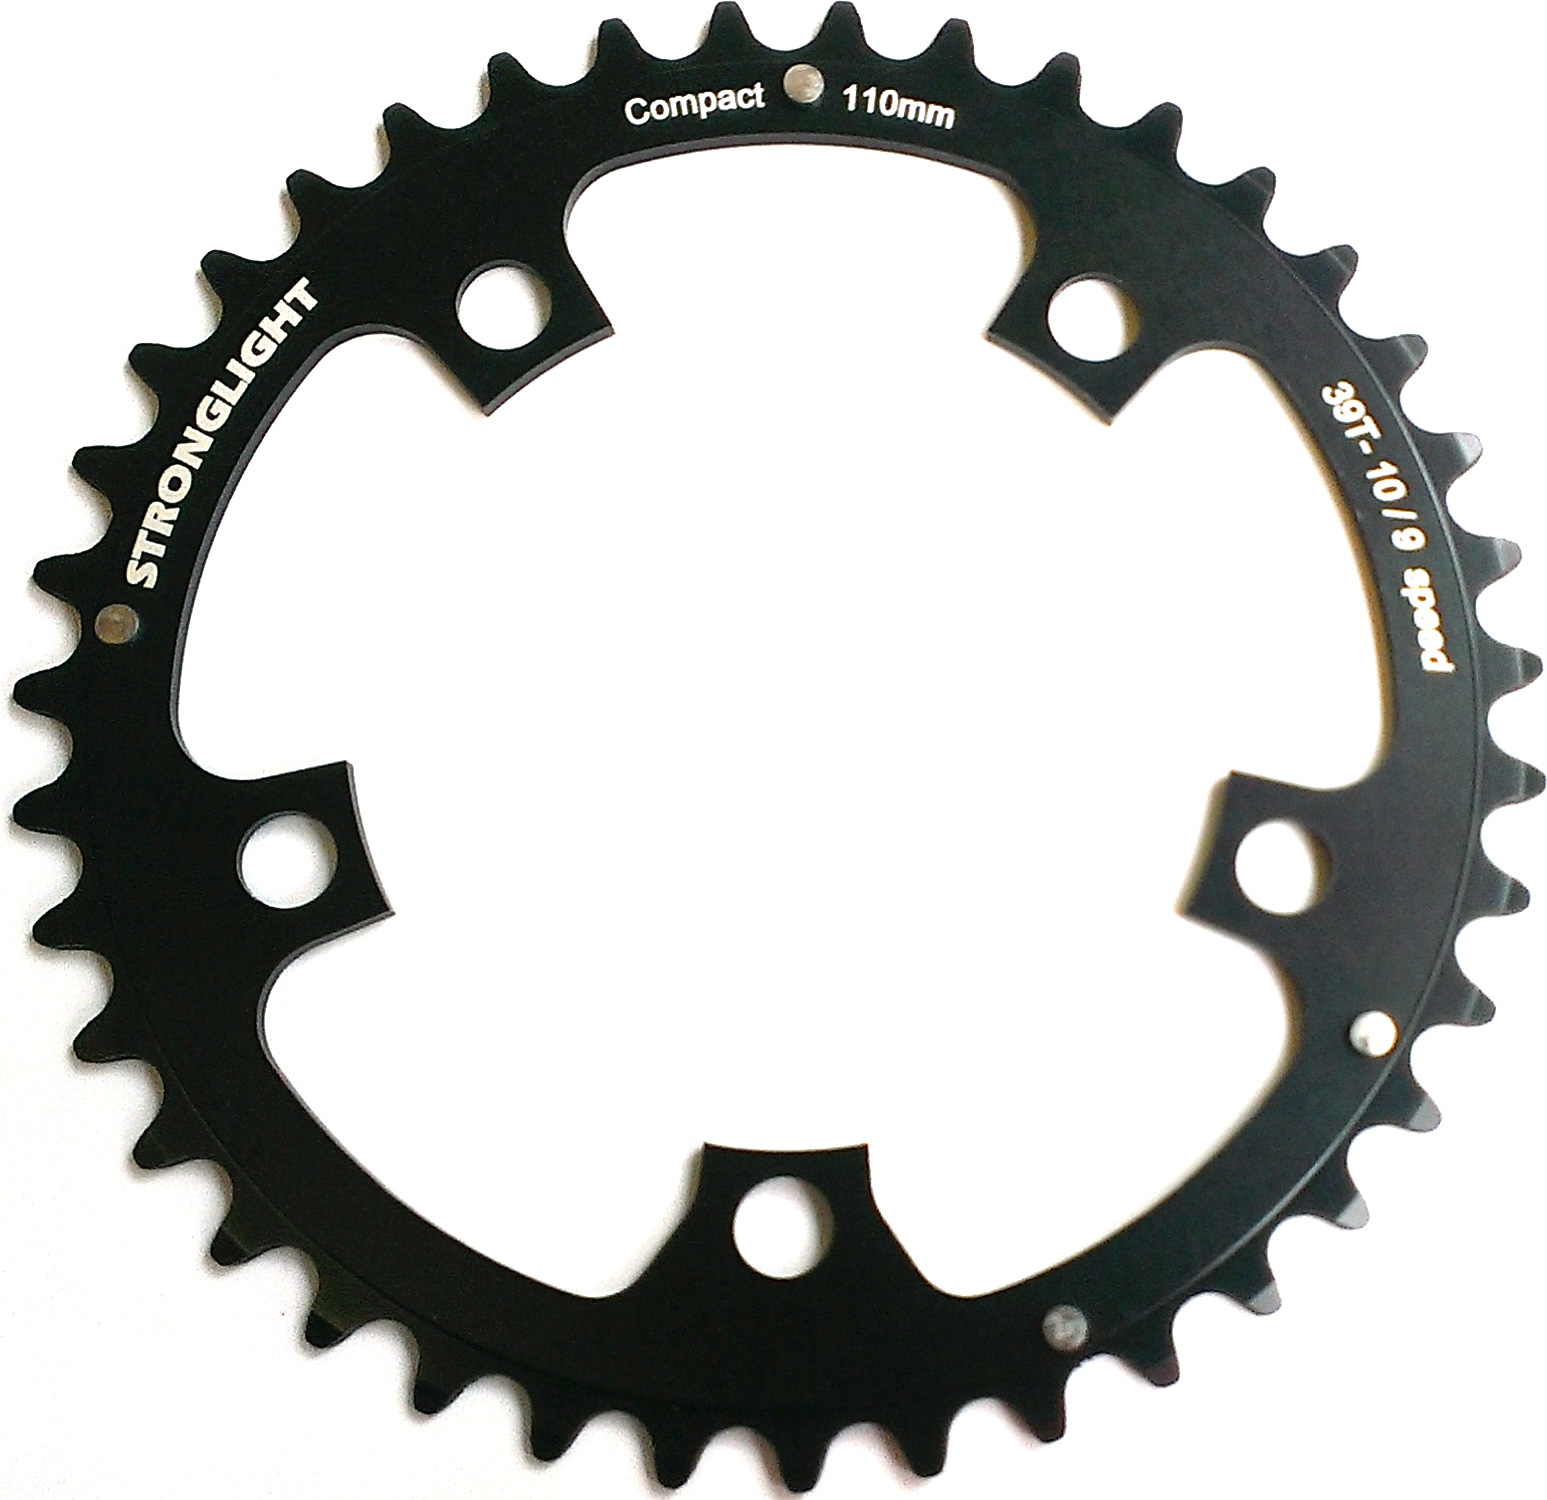 RD11042Z Stronglight 42T Black 5-Arm/110mm Chainring